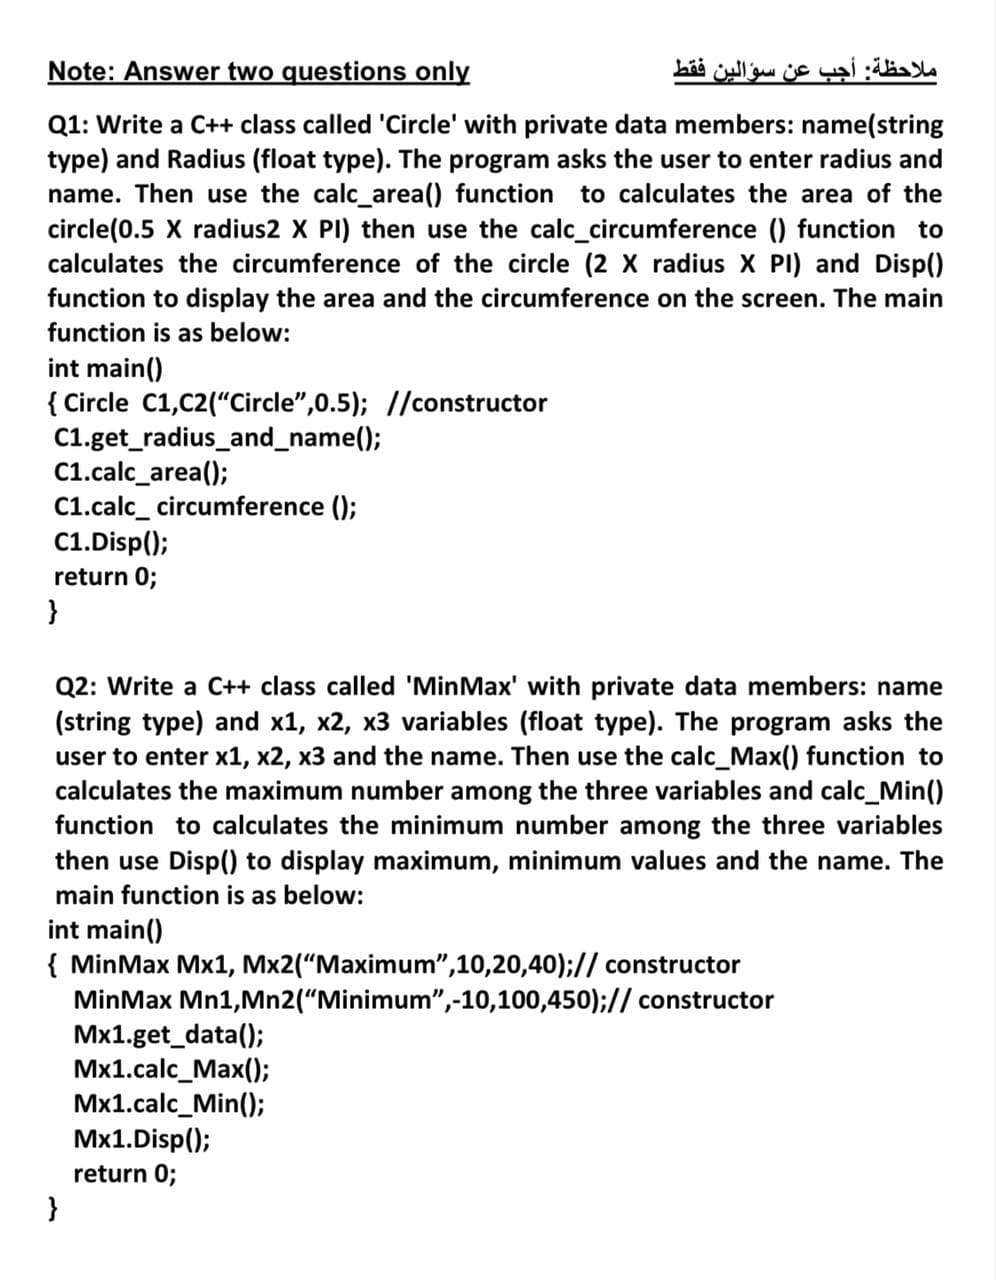 Note: Answer two questions only
ملاحظة: أجب عن سؤالين فقط
Q1: Write a C++ class called 'Circle' with private data members: name(string
type) and Radius (float type). The program asks the user to enter radius and
name. Then use the calc_area() function to calculates the area of the
circle(0.5 X radius2 X PI) then use the calc_circumference () function to
calculates the circumference of the circle (2 X radius X PI) and Disp()
function to display the area and the circumference on the screen. The main
function is as below:
int main()
{ Circle C1,C2("Circle",0.5); //constructor
C1.get_radius_and_name();
C1.calc_area();
C1.calc_ circumference ();
C1.Disp();
return 0;
}
Q2: Write a C++ class called 'MinMax' with private data members: name
(string type) and x1, x2, x3 variables (float type). The program asks the
user to enter x1, x2, x3 and the name. Then use the calc_Max() function to
calculates the maximum number among the three variables and calc_Min()
function to calculates the minimum number among the three variables
then use Disp() to display maximum, minimum values and the name. The
main function is as below:
int main()
{ MinMax Mx1, Mx2(“Maximum",10,20,40);// constructor
MinMax Mn1,Mn2("Minimum",-10,100,450);// constructor
Mx1.get_data();
Mx1.calc_Max();
Mx1.calc_Min();
Mx1.Disp();
return 0;
}
